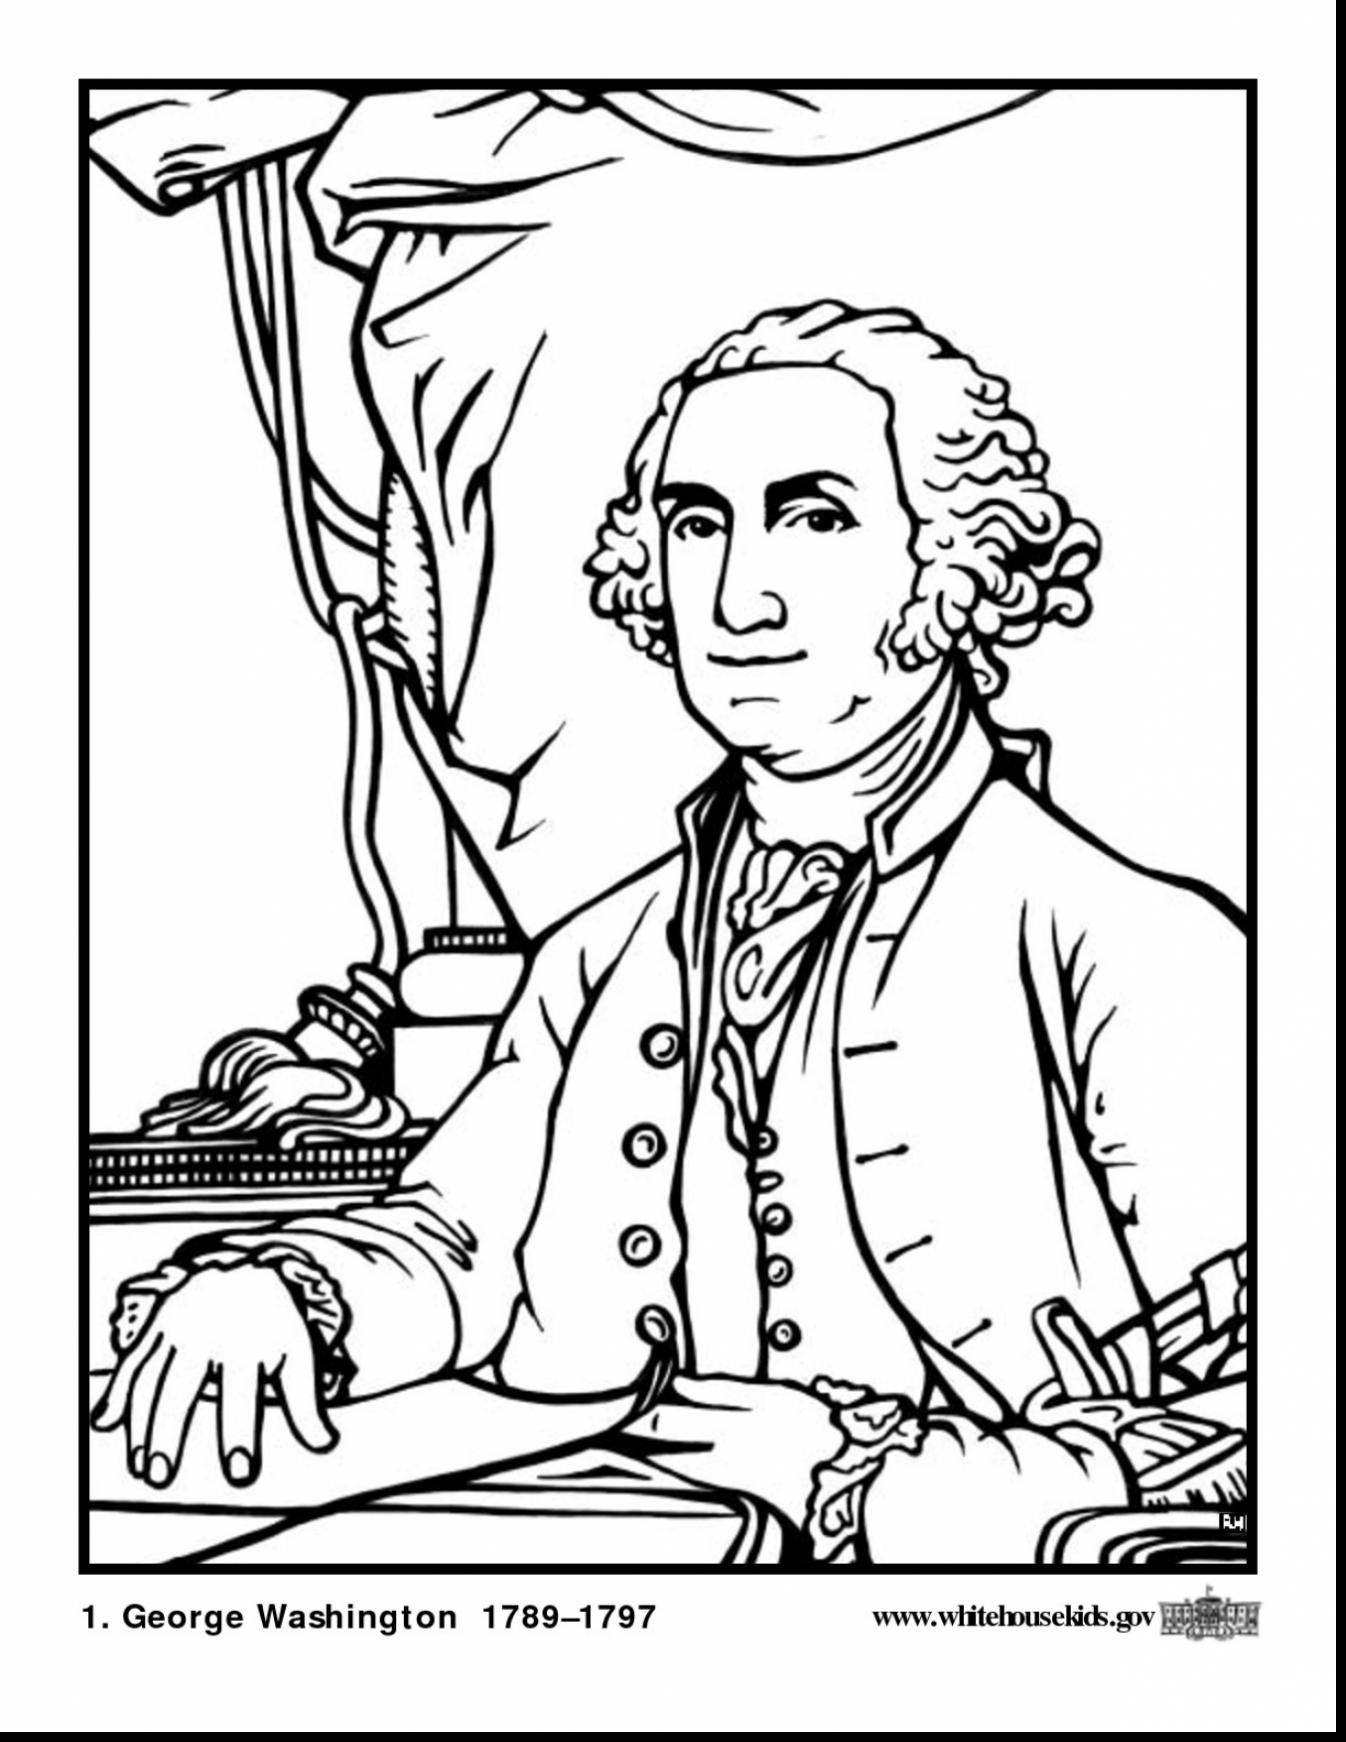 Abstract Presidents' Day coloring page